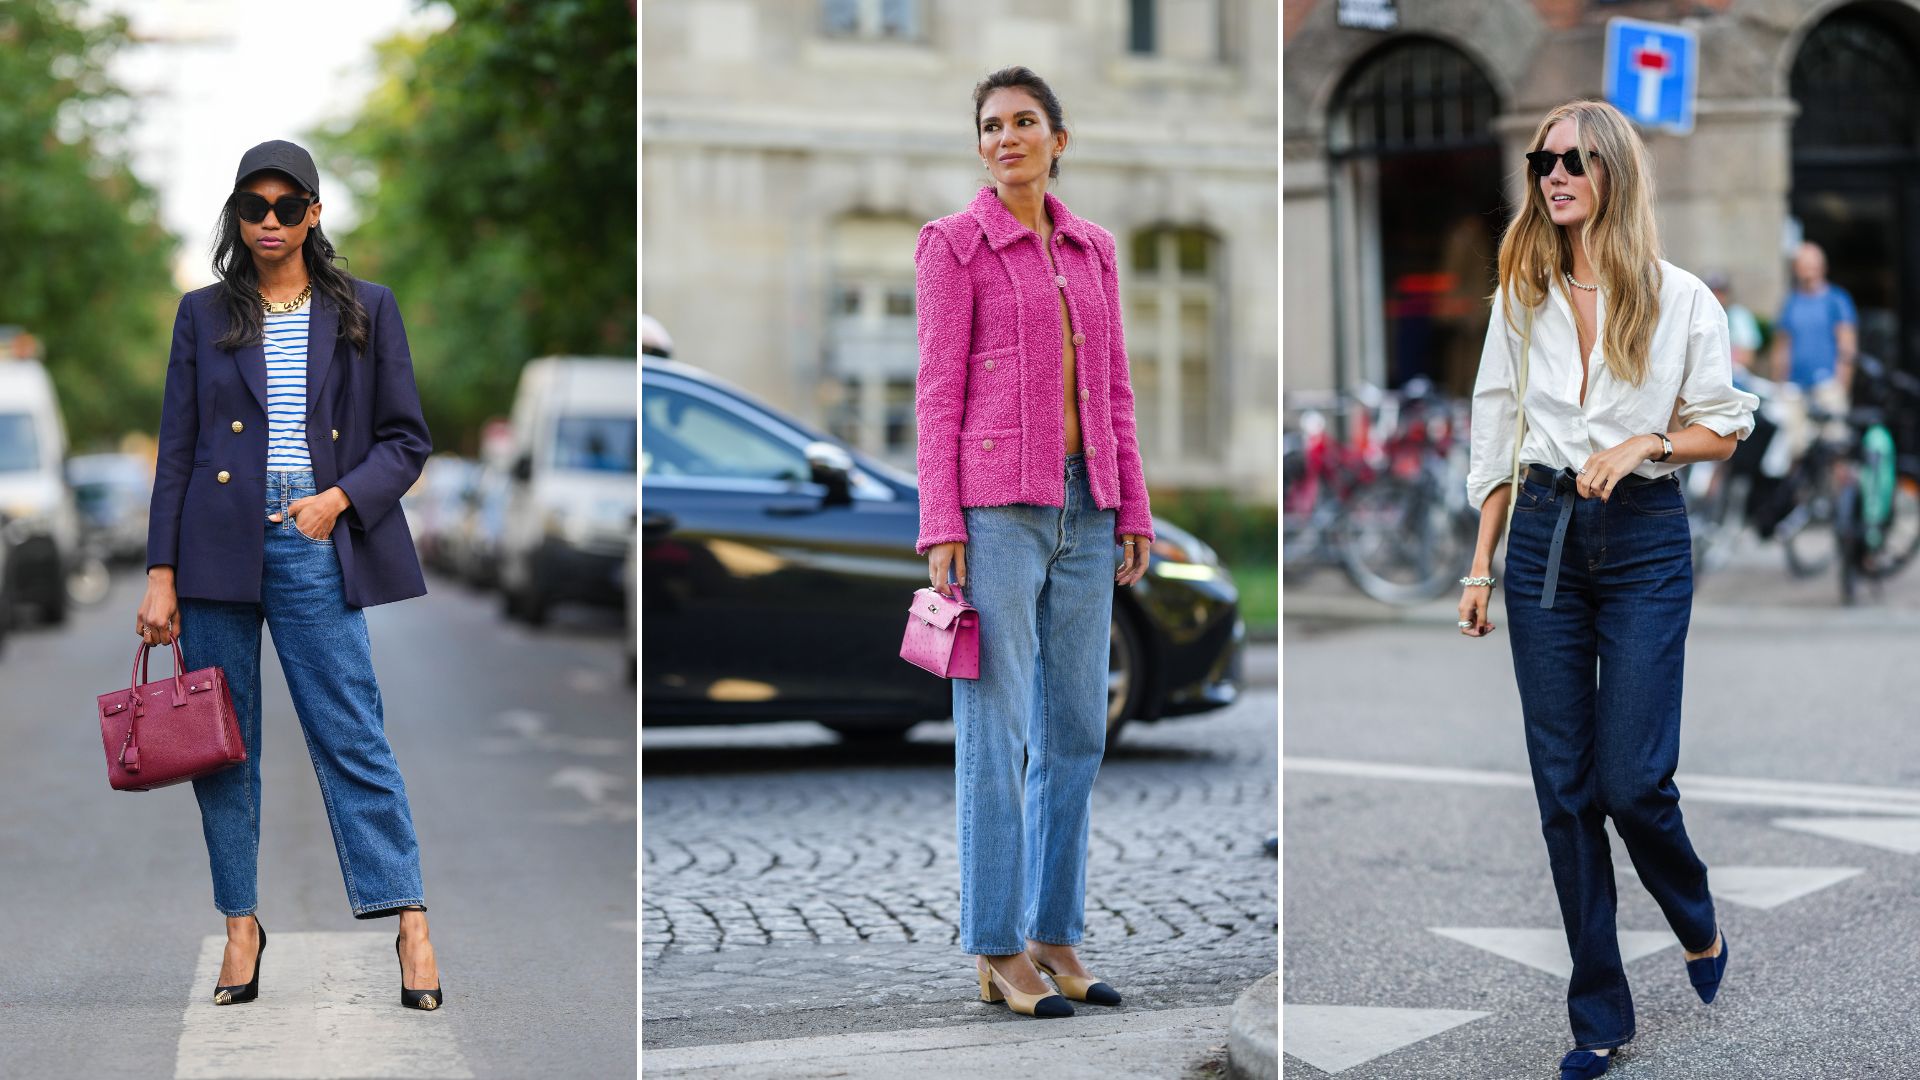 Jeans and heels: 7 ways to wear this classic combination